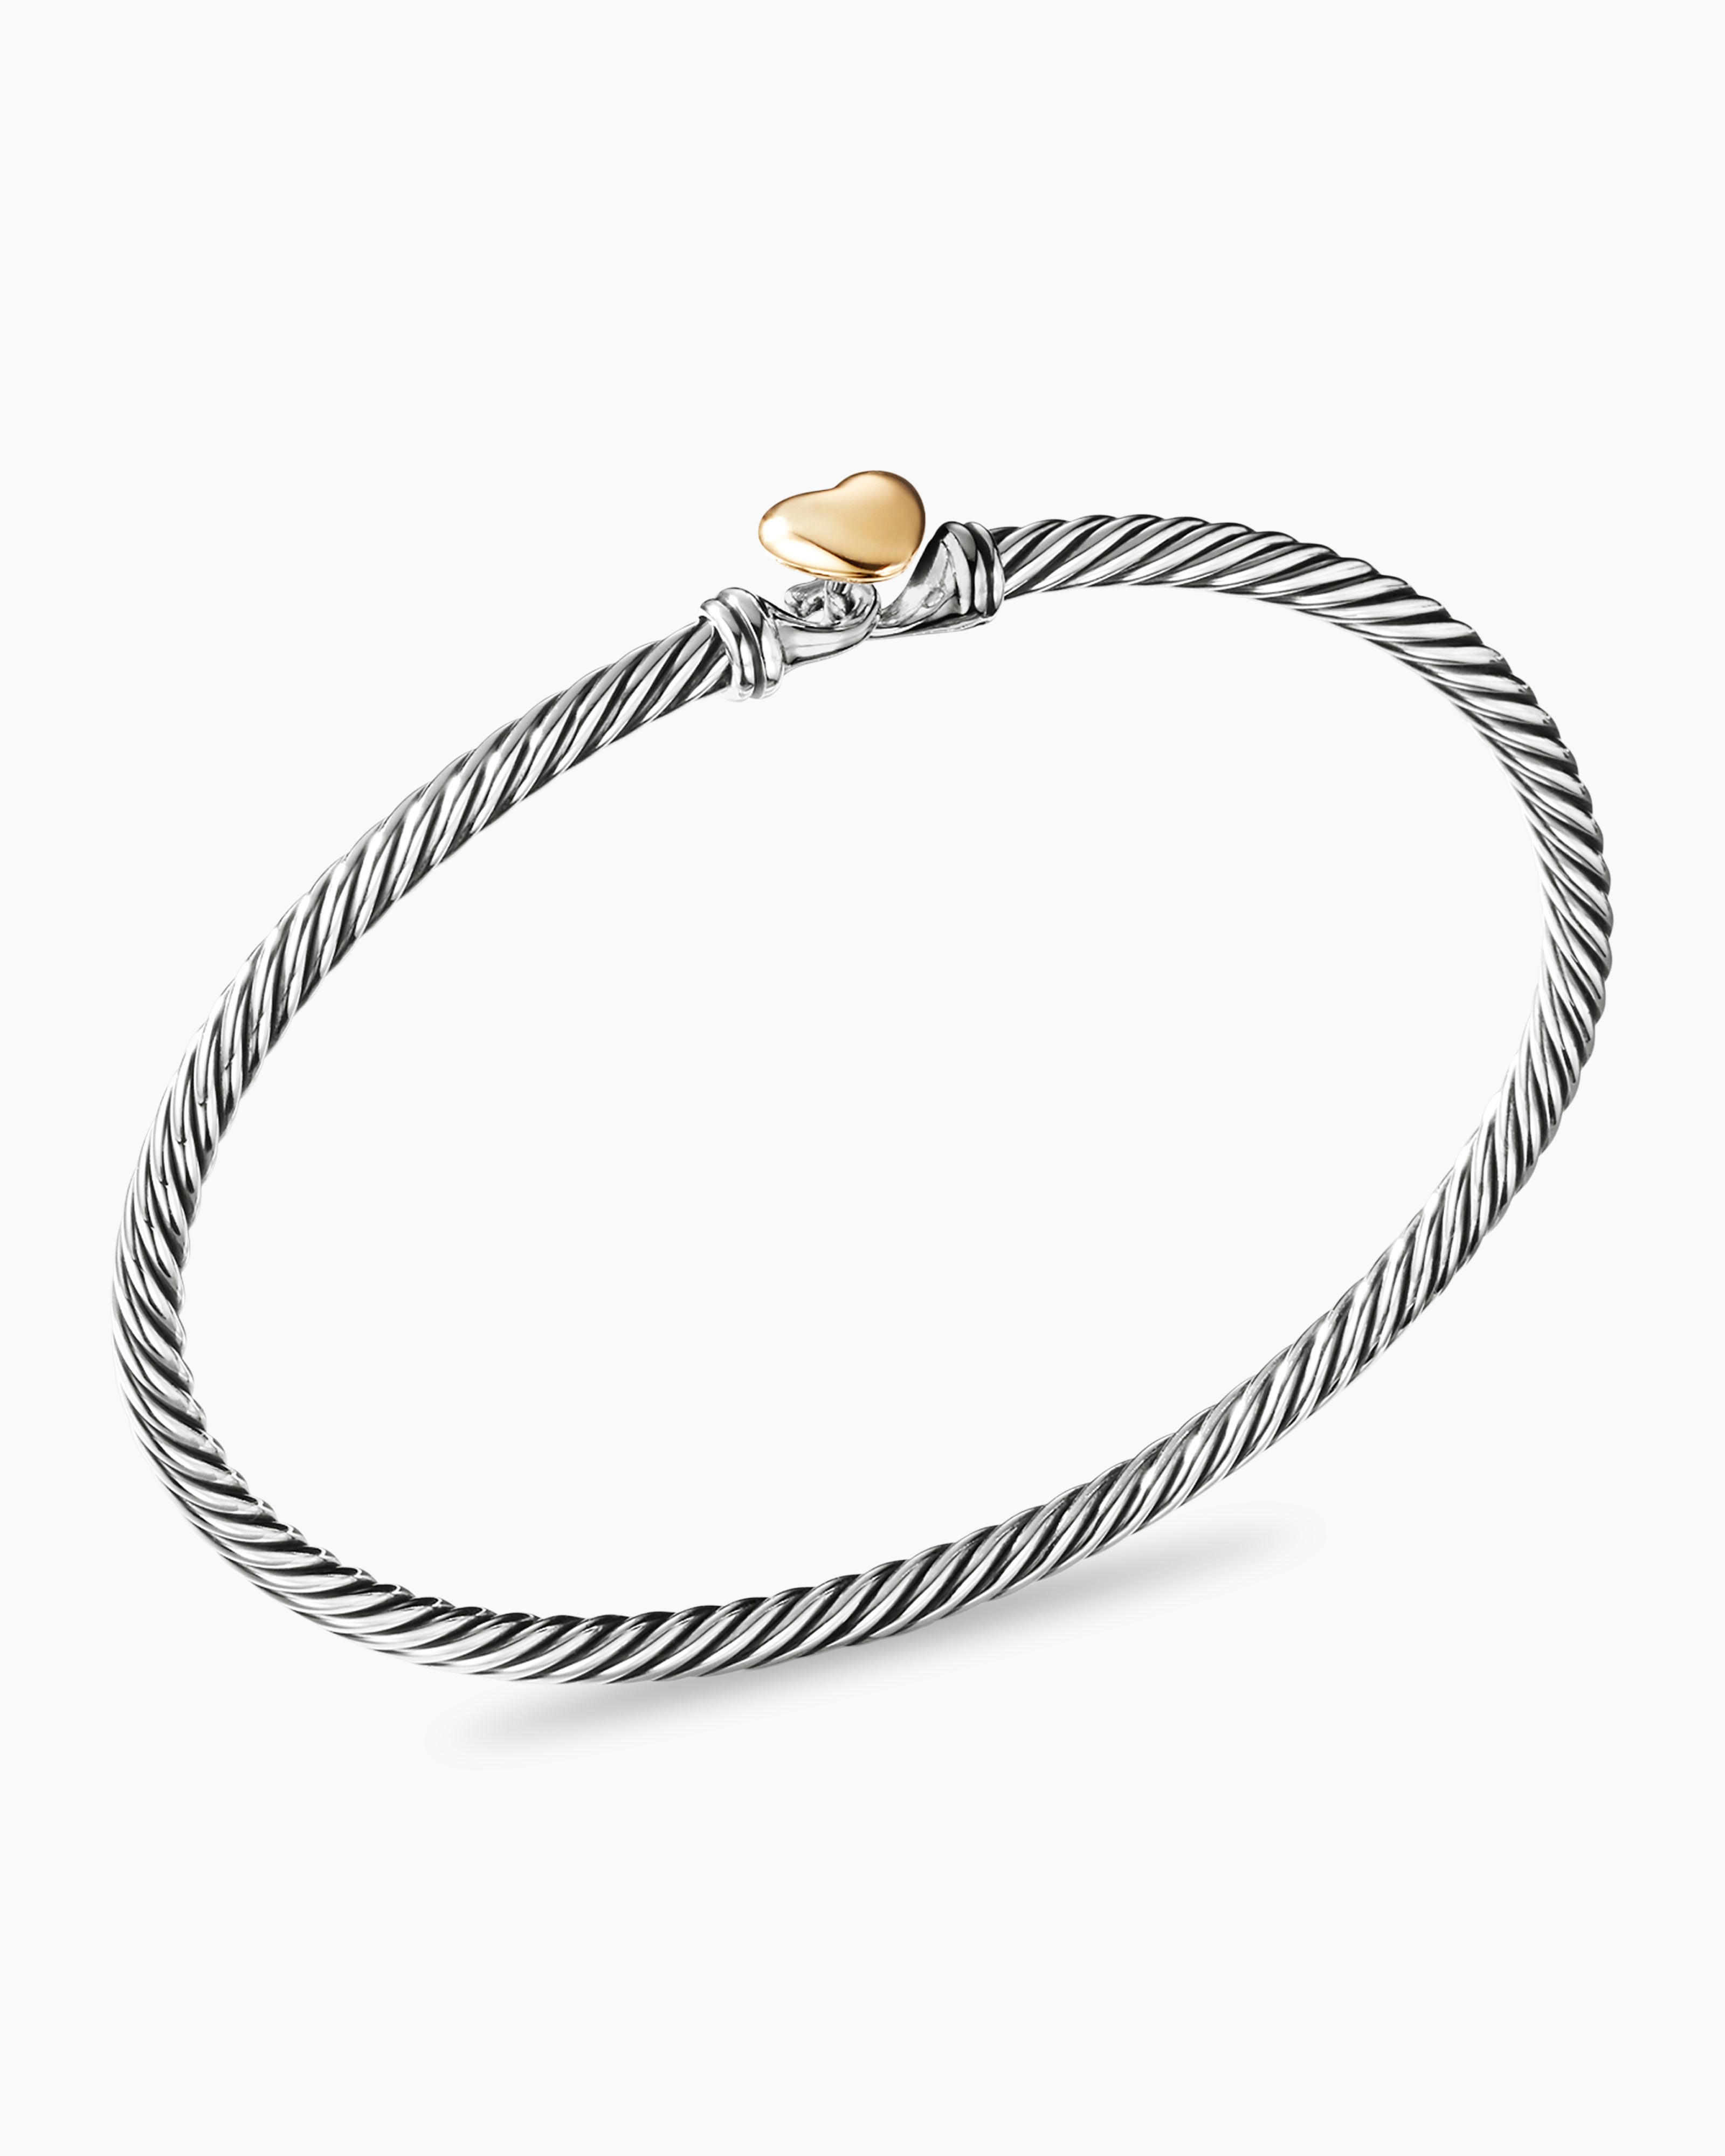 Gold, 18K Bracelet Sterling David Heart Silver Yellow 3mm Cable Yurman Classic with | in Station